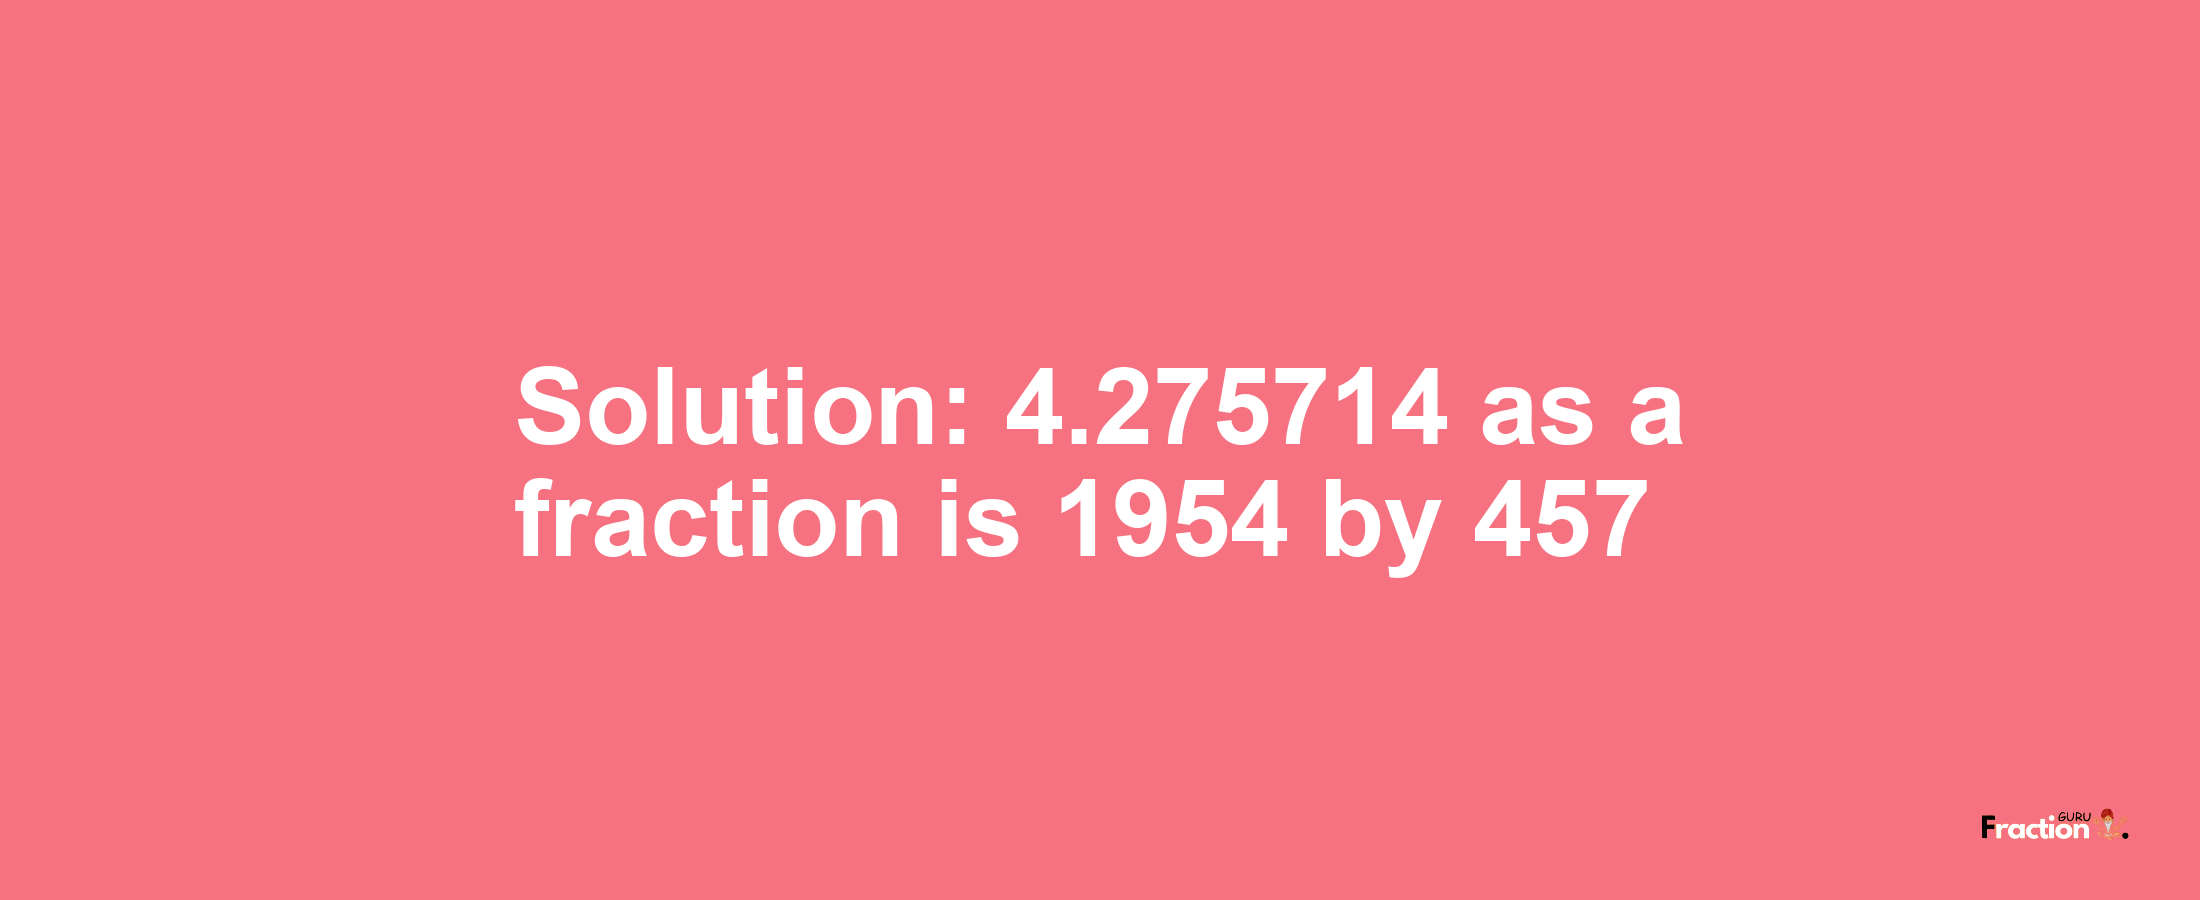 Solution:4.275714 as a fraction is 1954/457